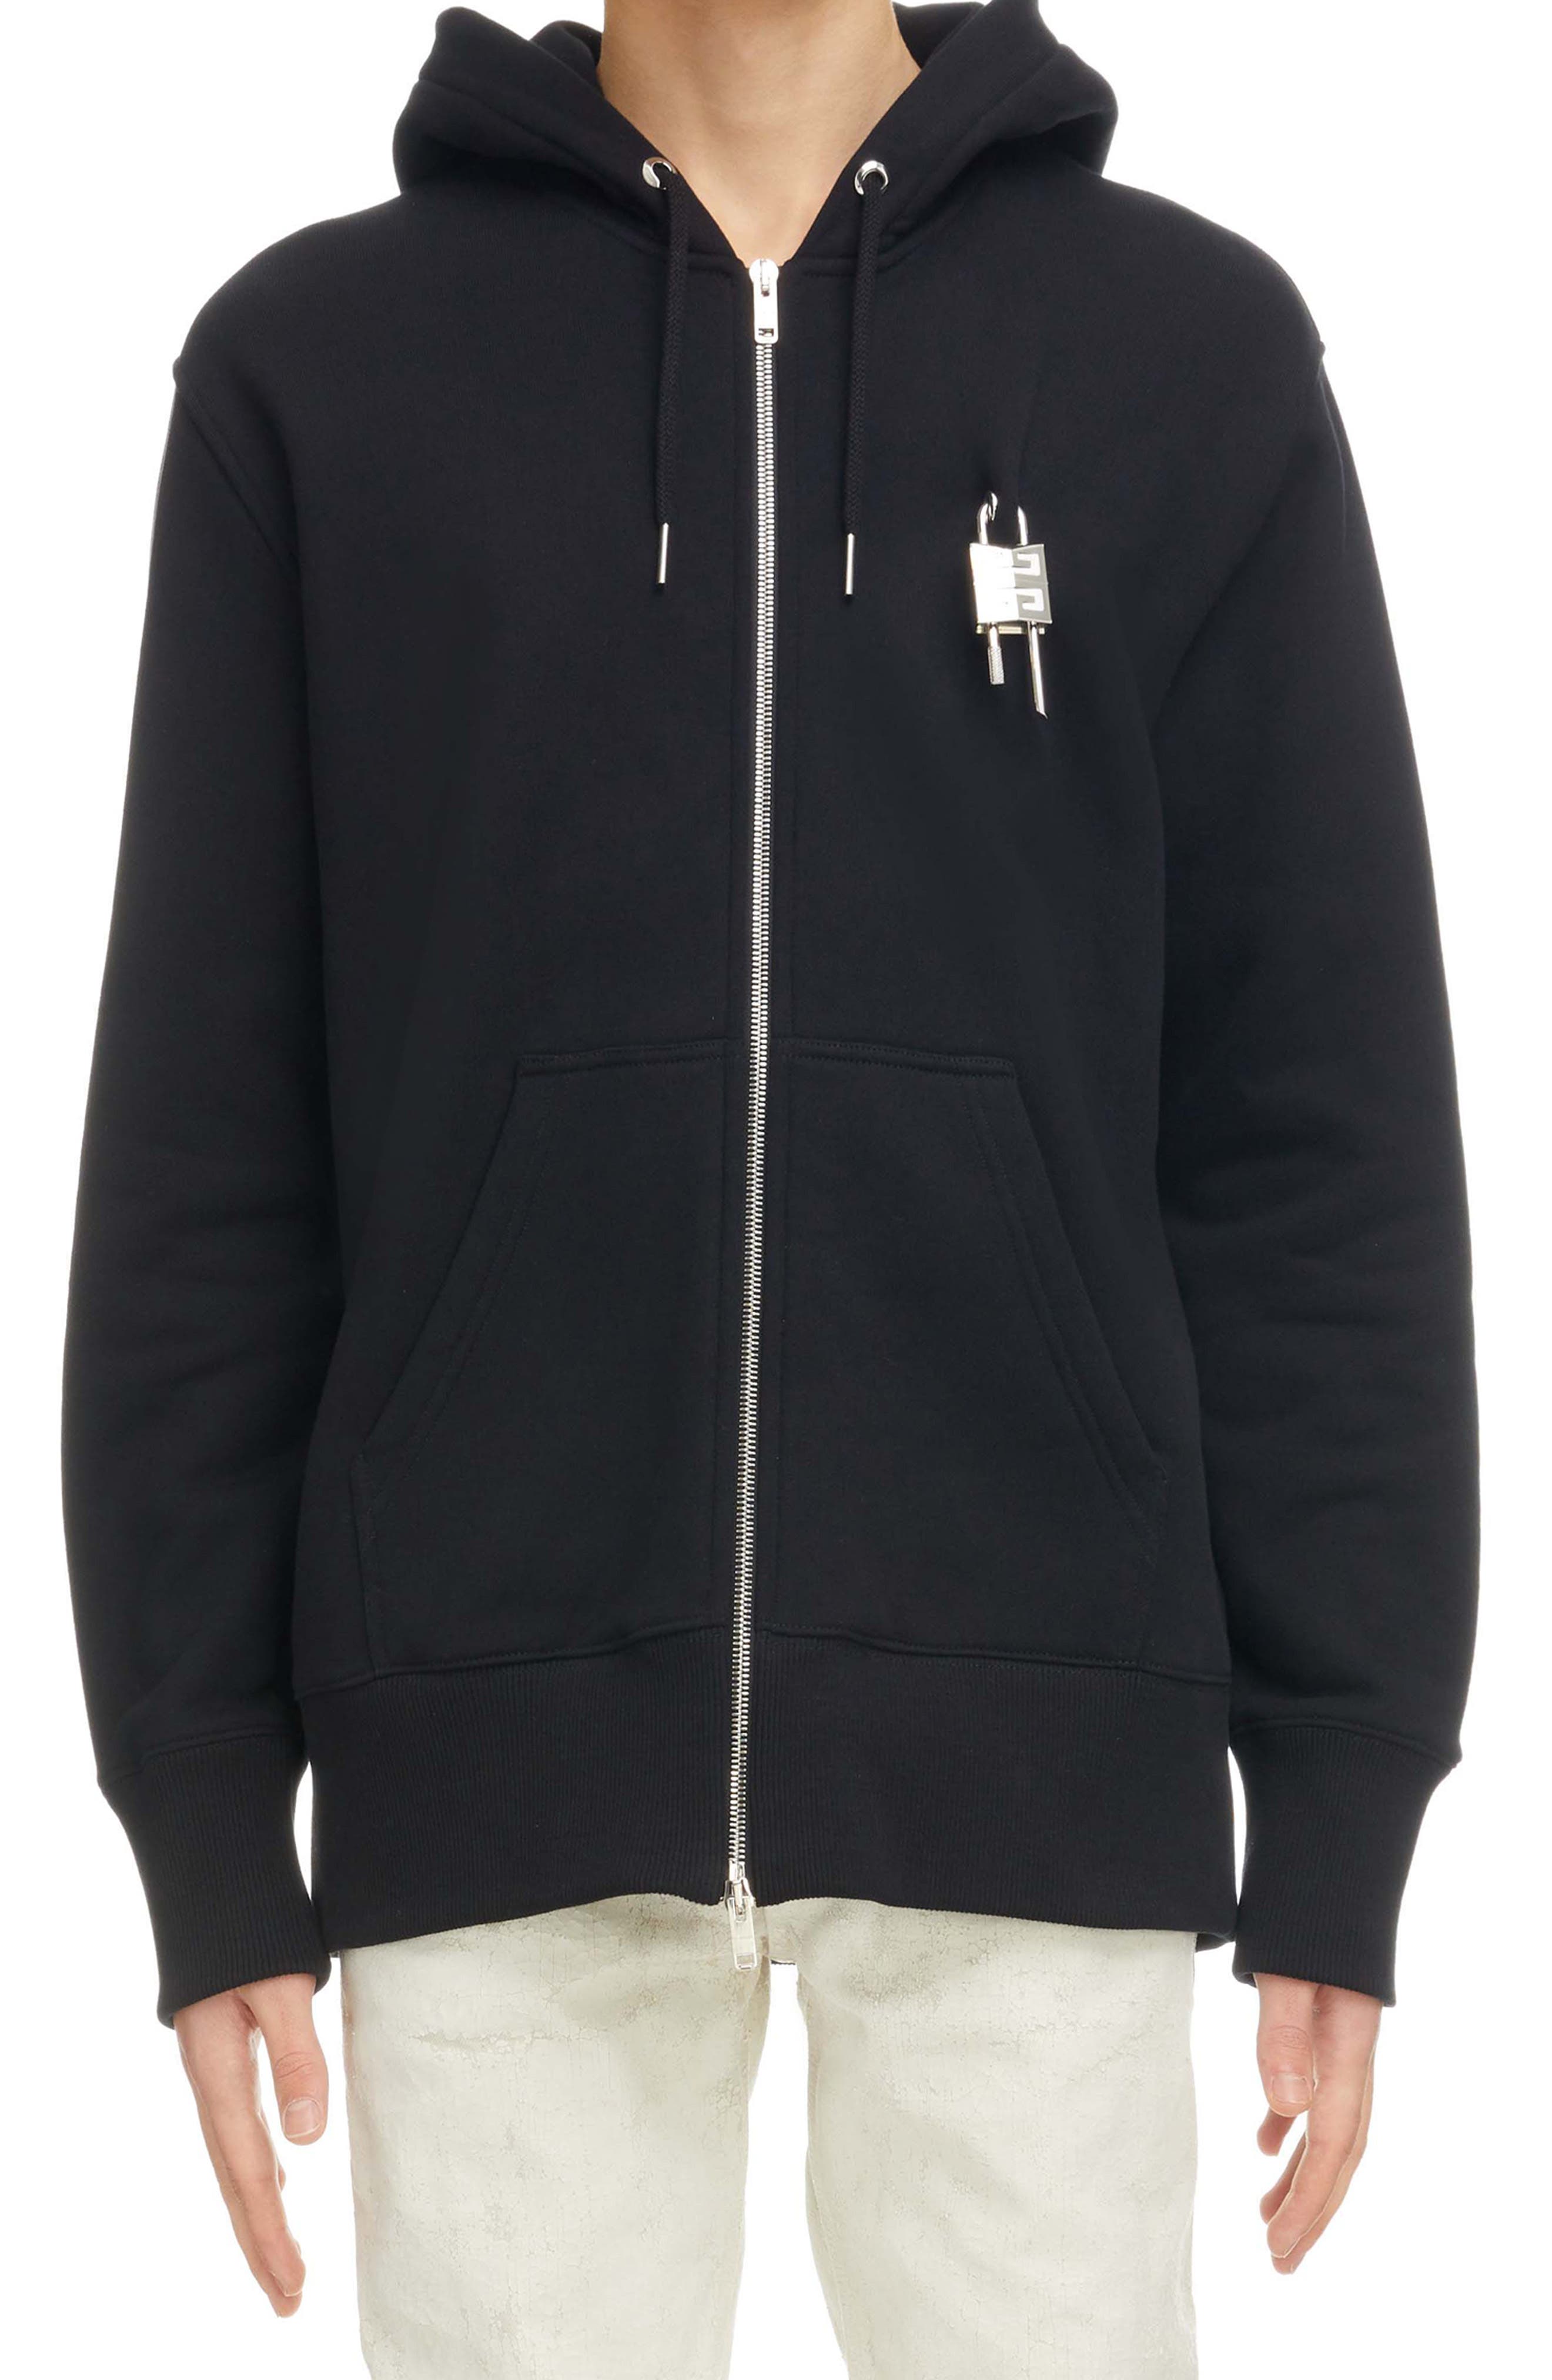 Givenchy padlock hoodie ジップアップパーカー | www.myglobaltax.com